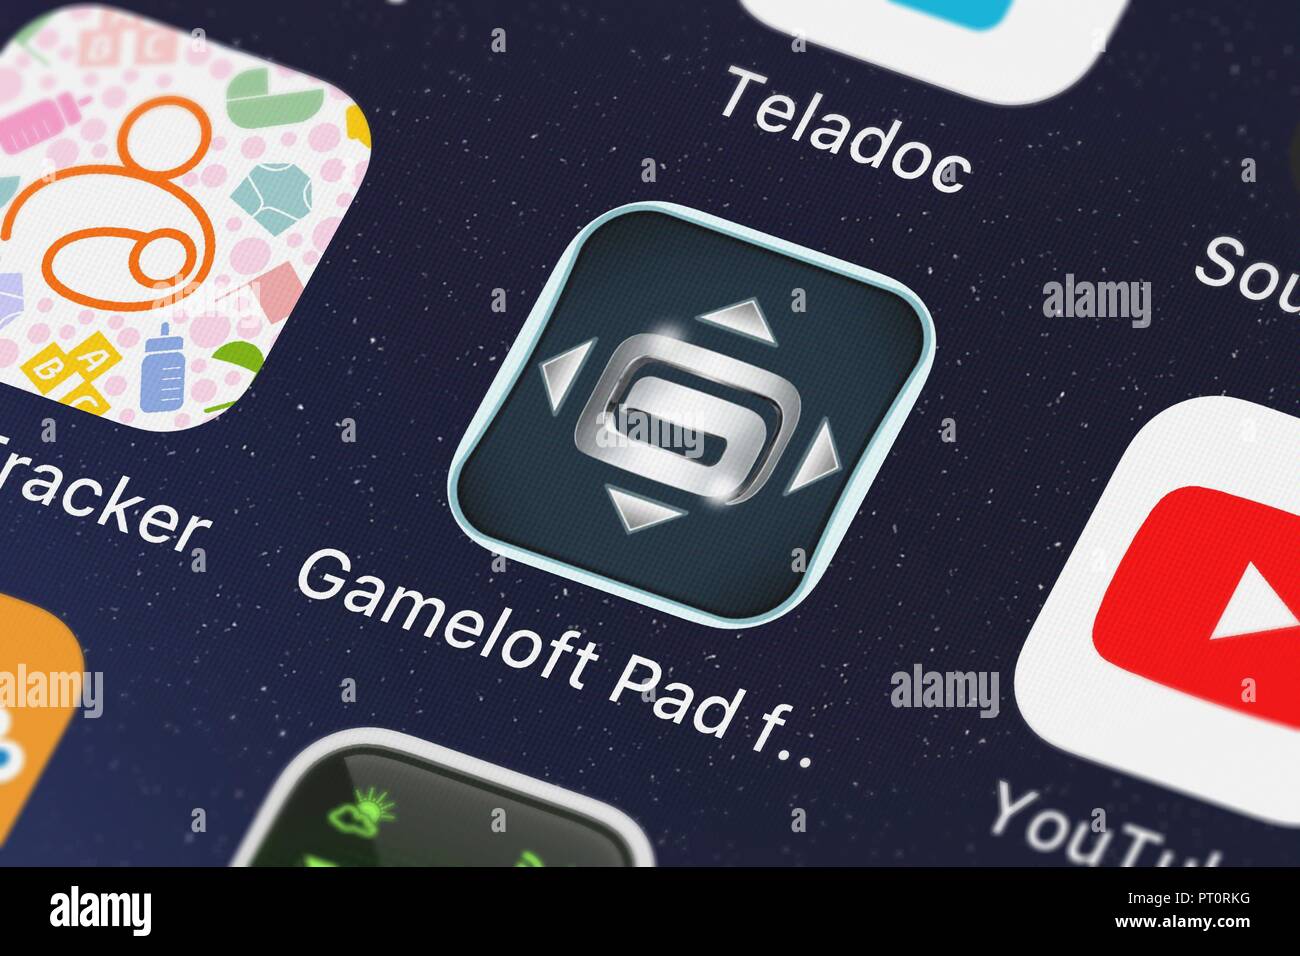 London, United Kingdom - October 05, 2018: Close-up shot of the Gameloft Pad for Samsung Smart TV mobile app from Gameloft. Stock Photo